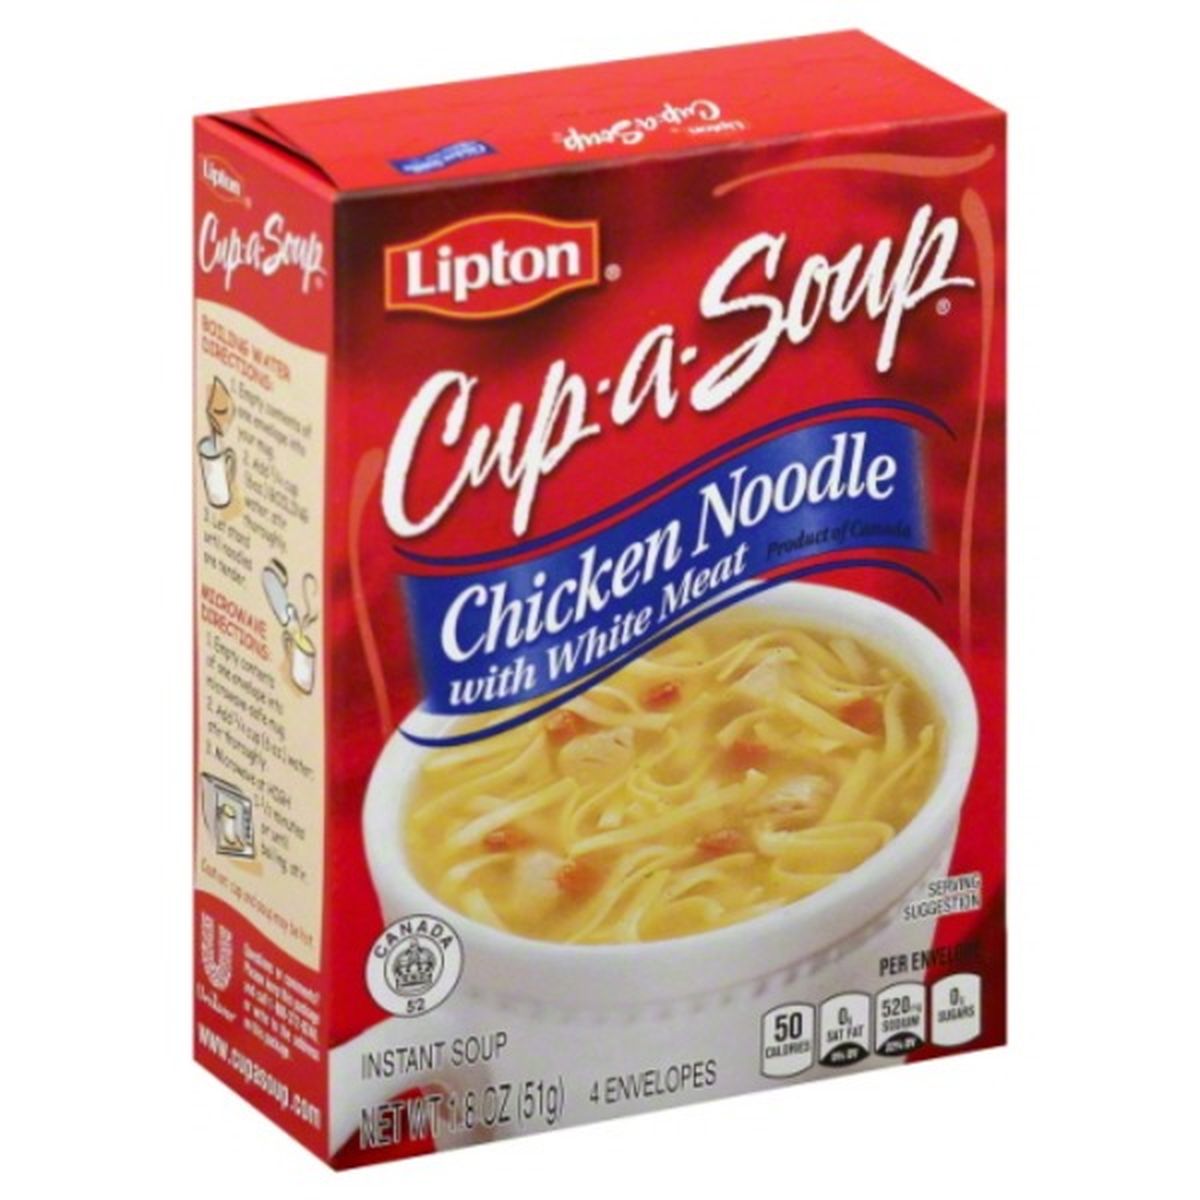 Calories in Lipton Cup-a-Soup Soup, Instant, Chicken Noodle with White Meat